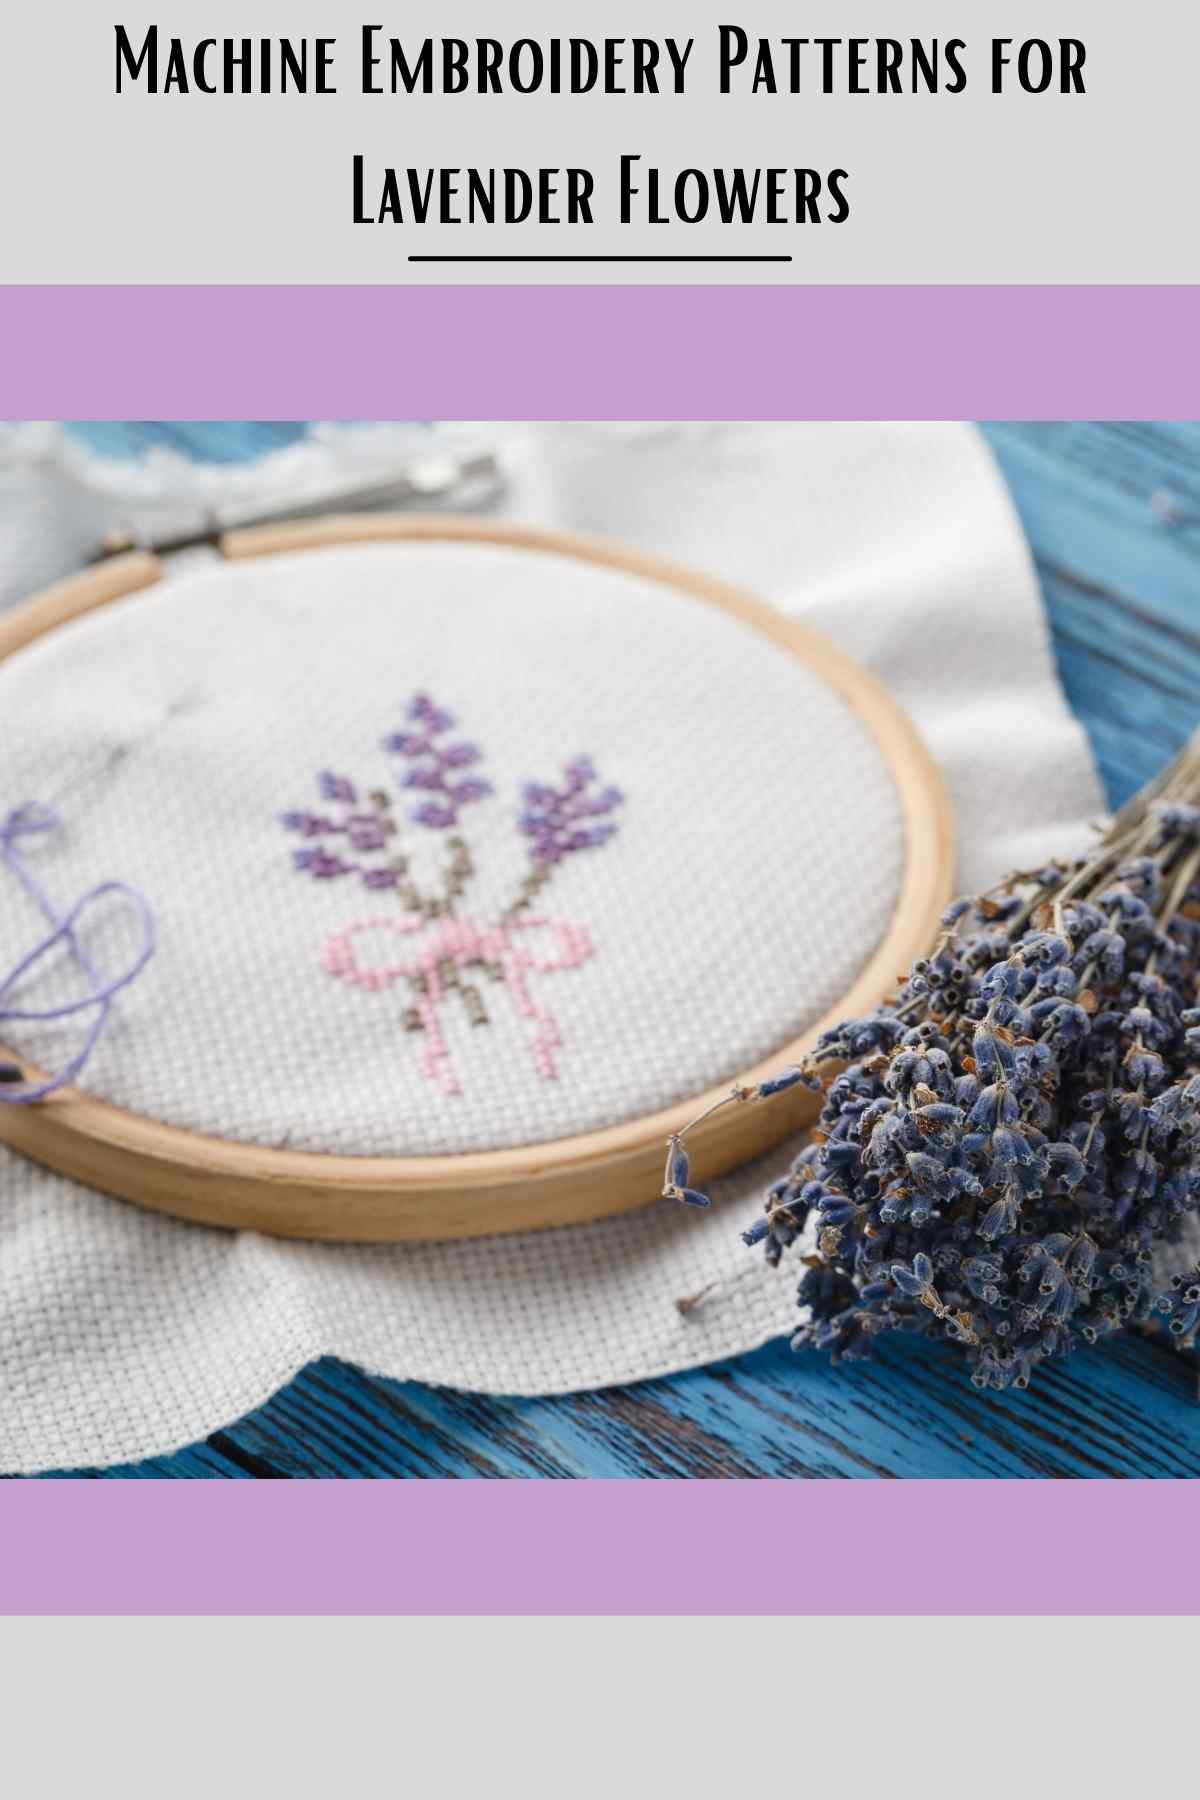 How to embroider lavender flowers